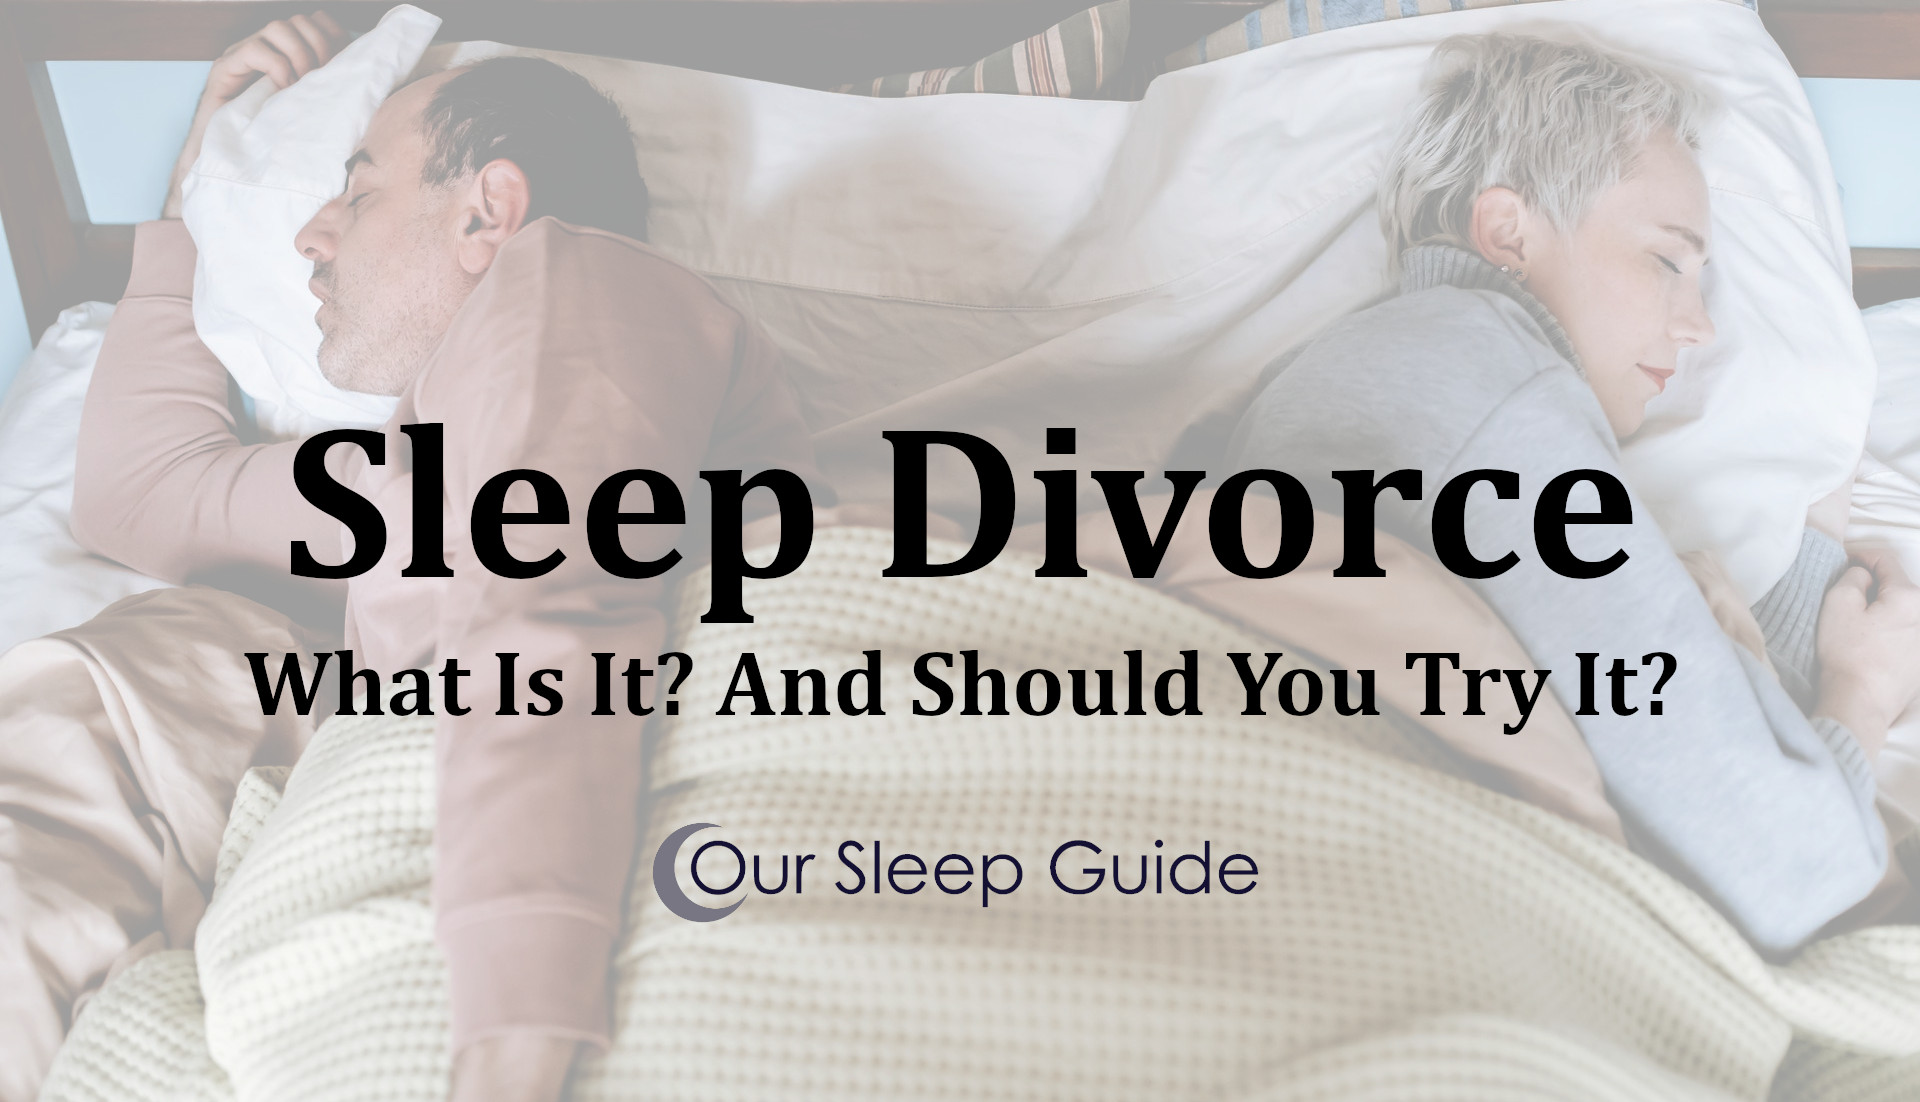 sleep divorce what is it and should you try it?